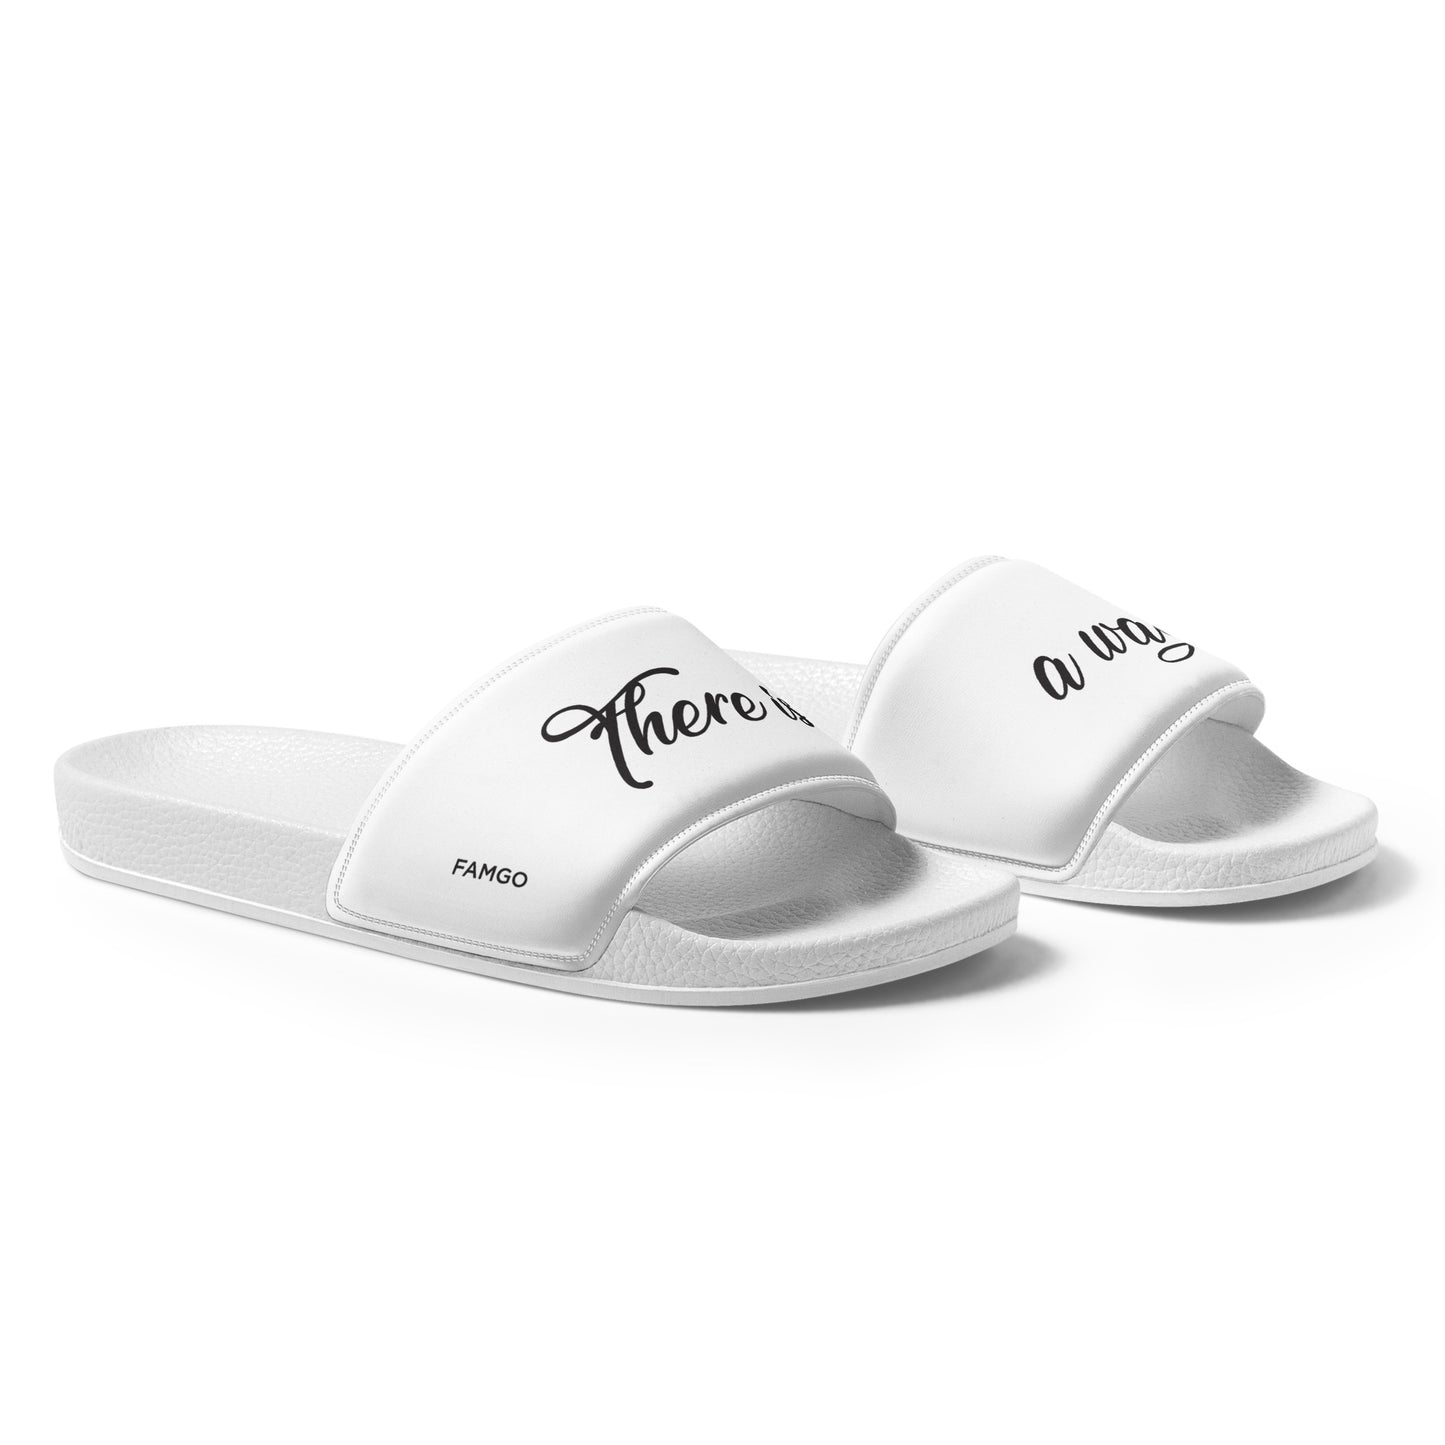 There Is A Way Women's Minimalist Slide Sandals